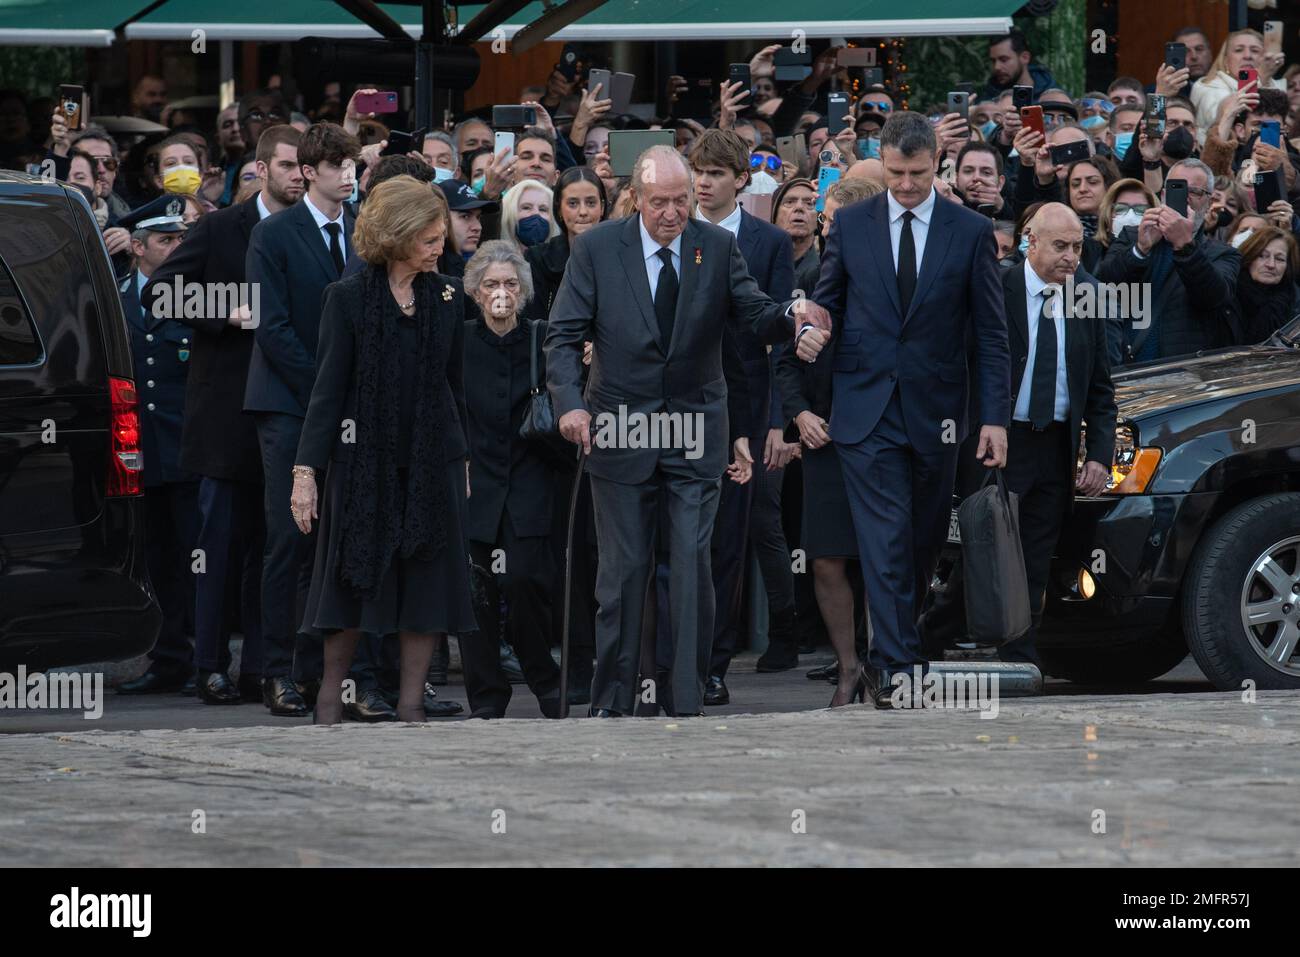 Athens, Greece. 16th January 2023. Queen Sofia of Spain, Princess Irene of Greece and King Juan Carlos of Spain arrive for the funeral of the former King Constantine II of Greece at the Metropolitan Cathedral of Athens. Credit: Nicolas Koutsokostas/Alamy Stock Photo. Stock Photo